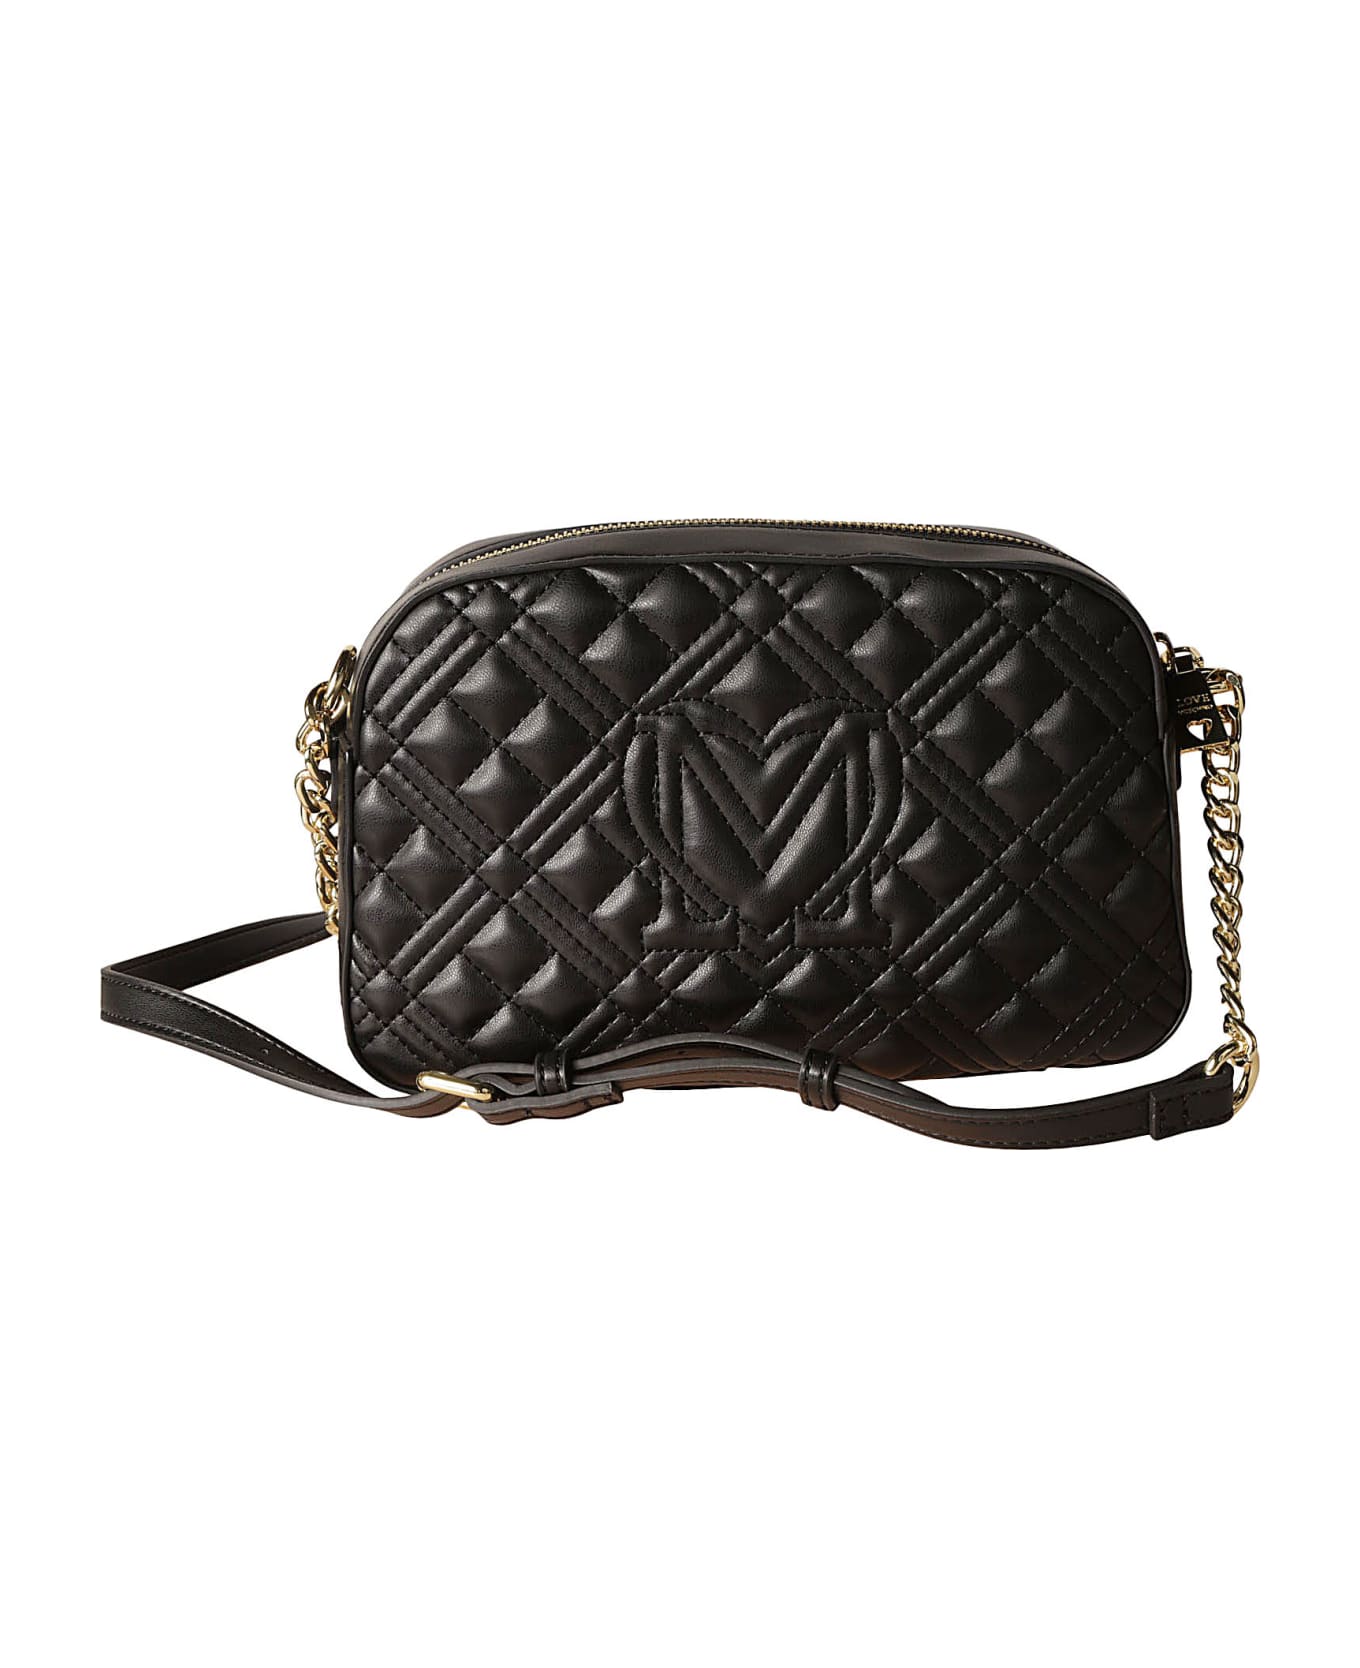 Love Moschino Top Zip Quilted Chain Shoulder Bag - Black